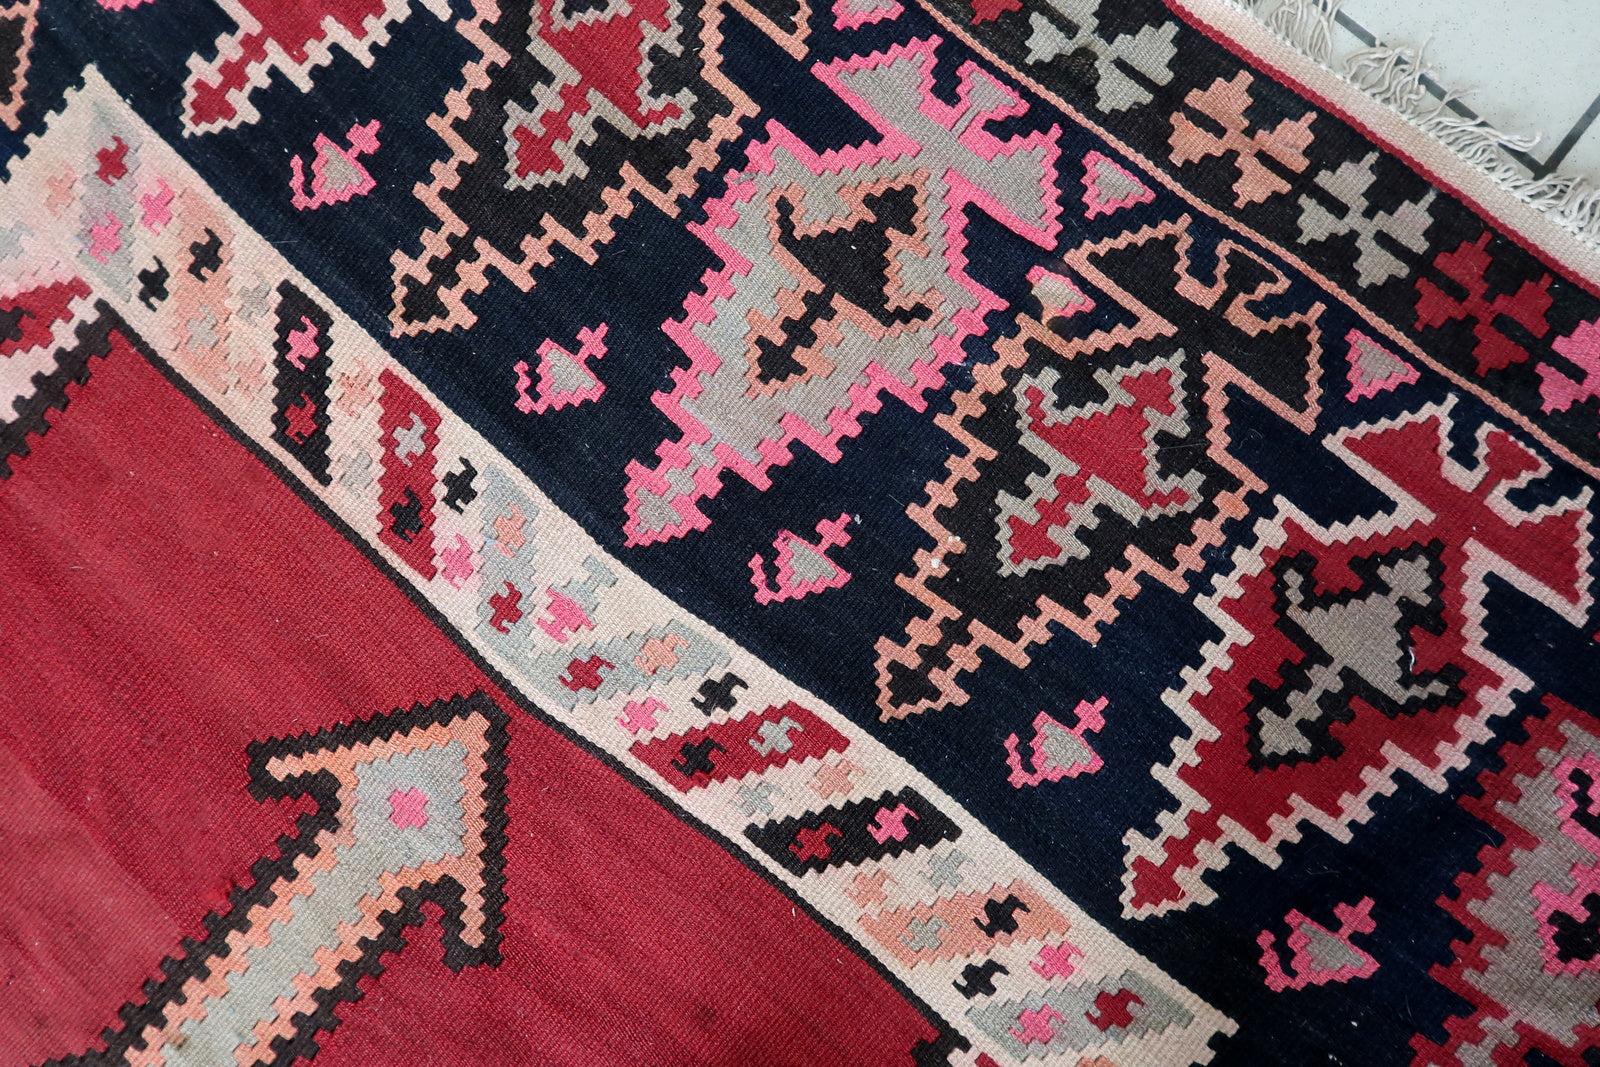 Intricate Brown and Turquoise Design in Afghan Kilim